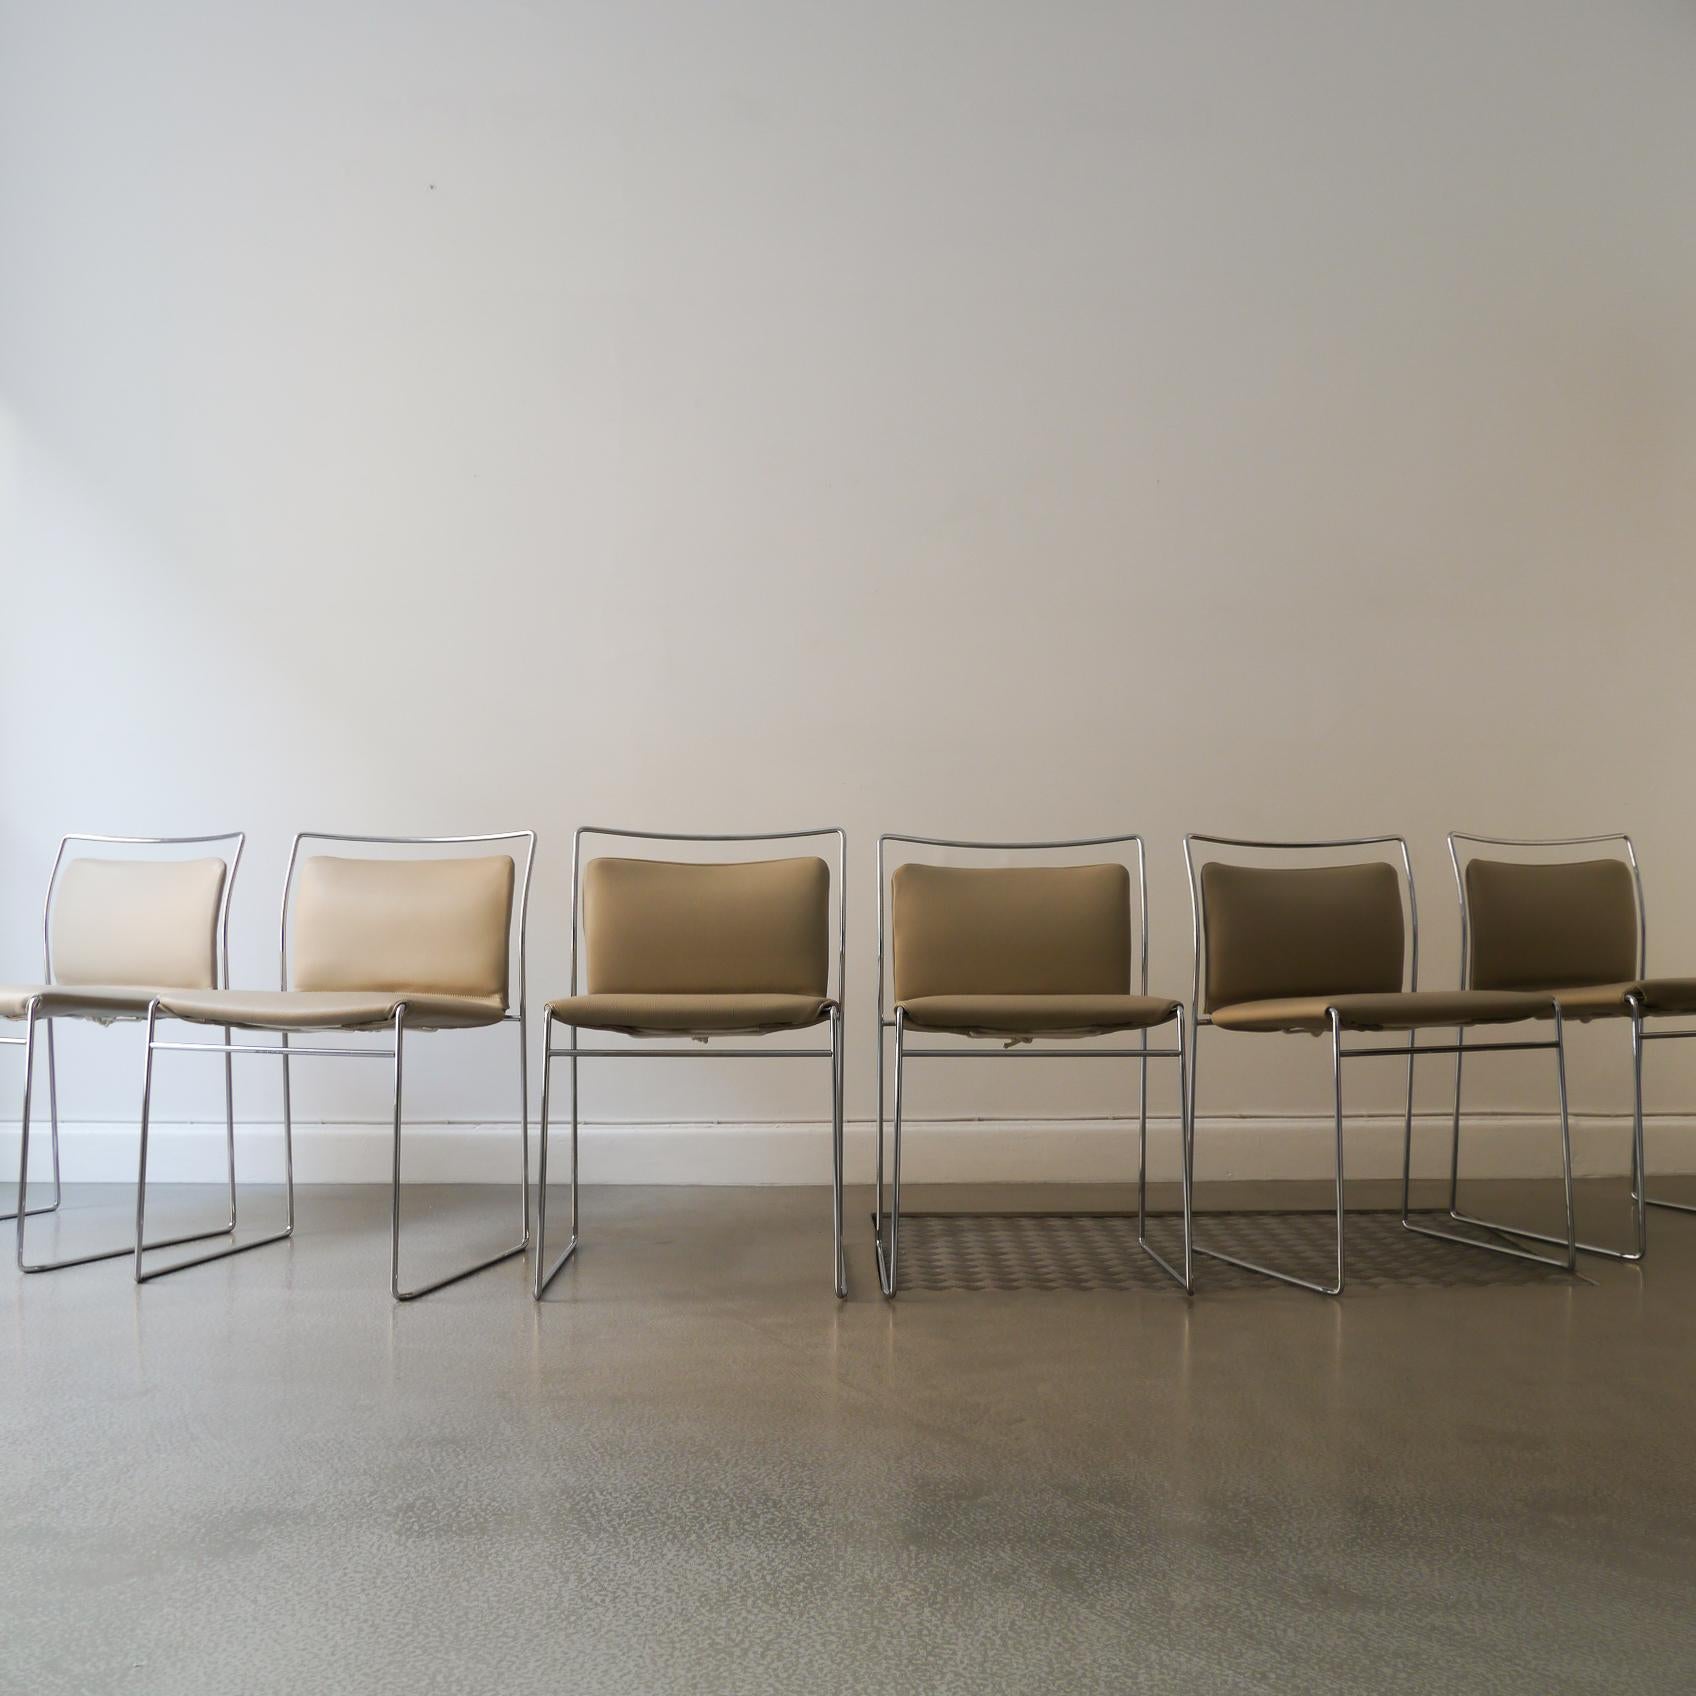 Original tubular chrome Tulu chairs designed by Kazuide Takahama for Simon Gavina, Cassina in 1968. This stackable chair has a light, tubular frame made in bent chrome. It has beautiful, clean lines typical of Takahama's designs during the late 60s